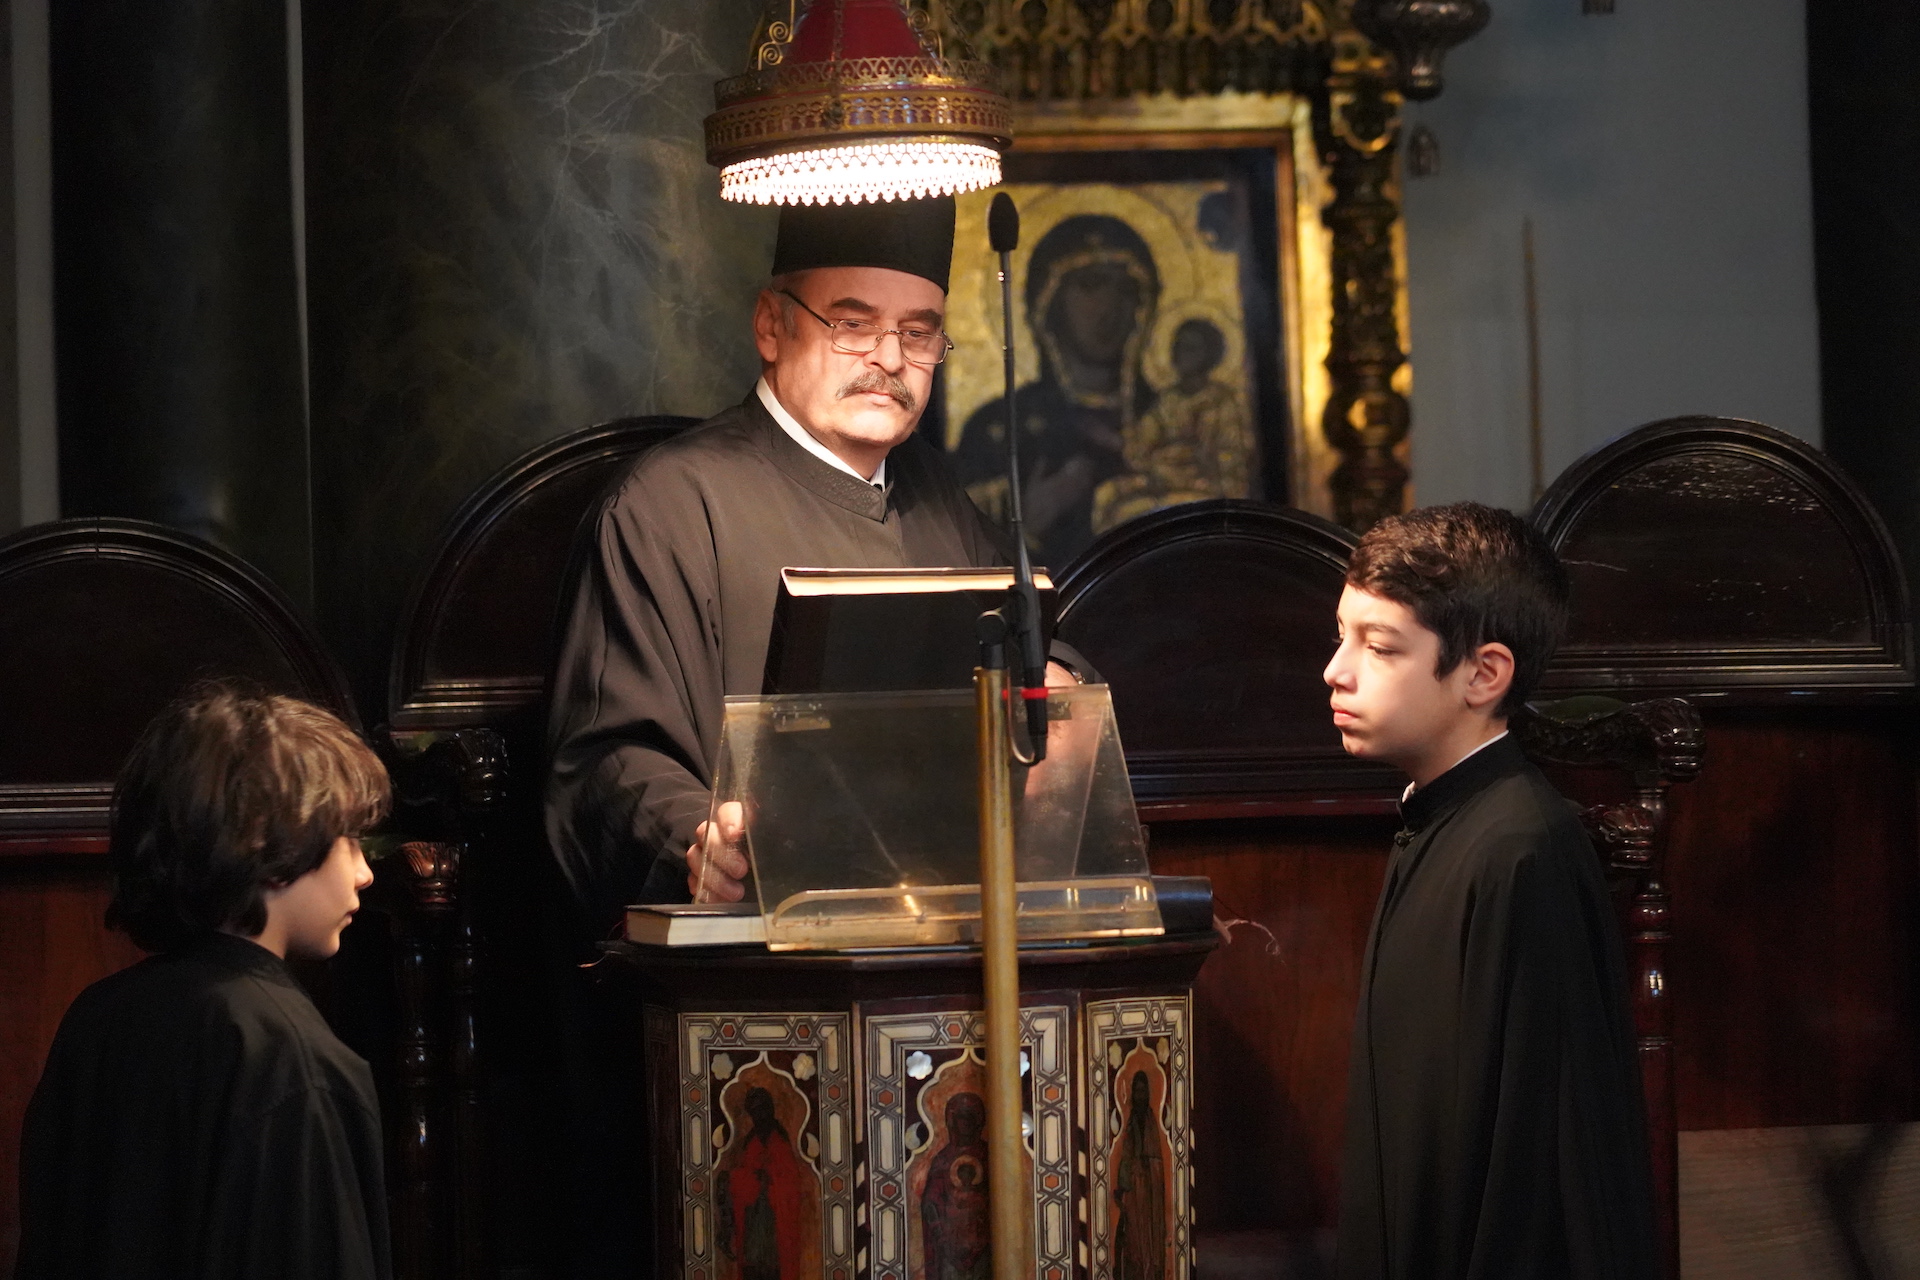 Metropolitan Isaiah of Tamassos and Oreinis officiated at the Venerable Patriarchal Church of Saint George